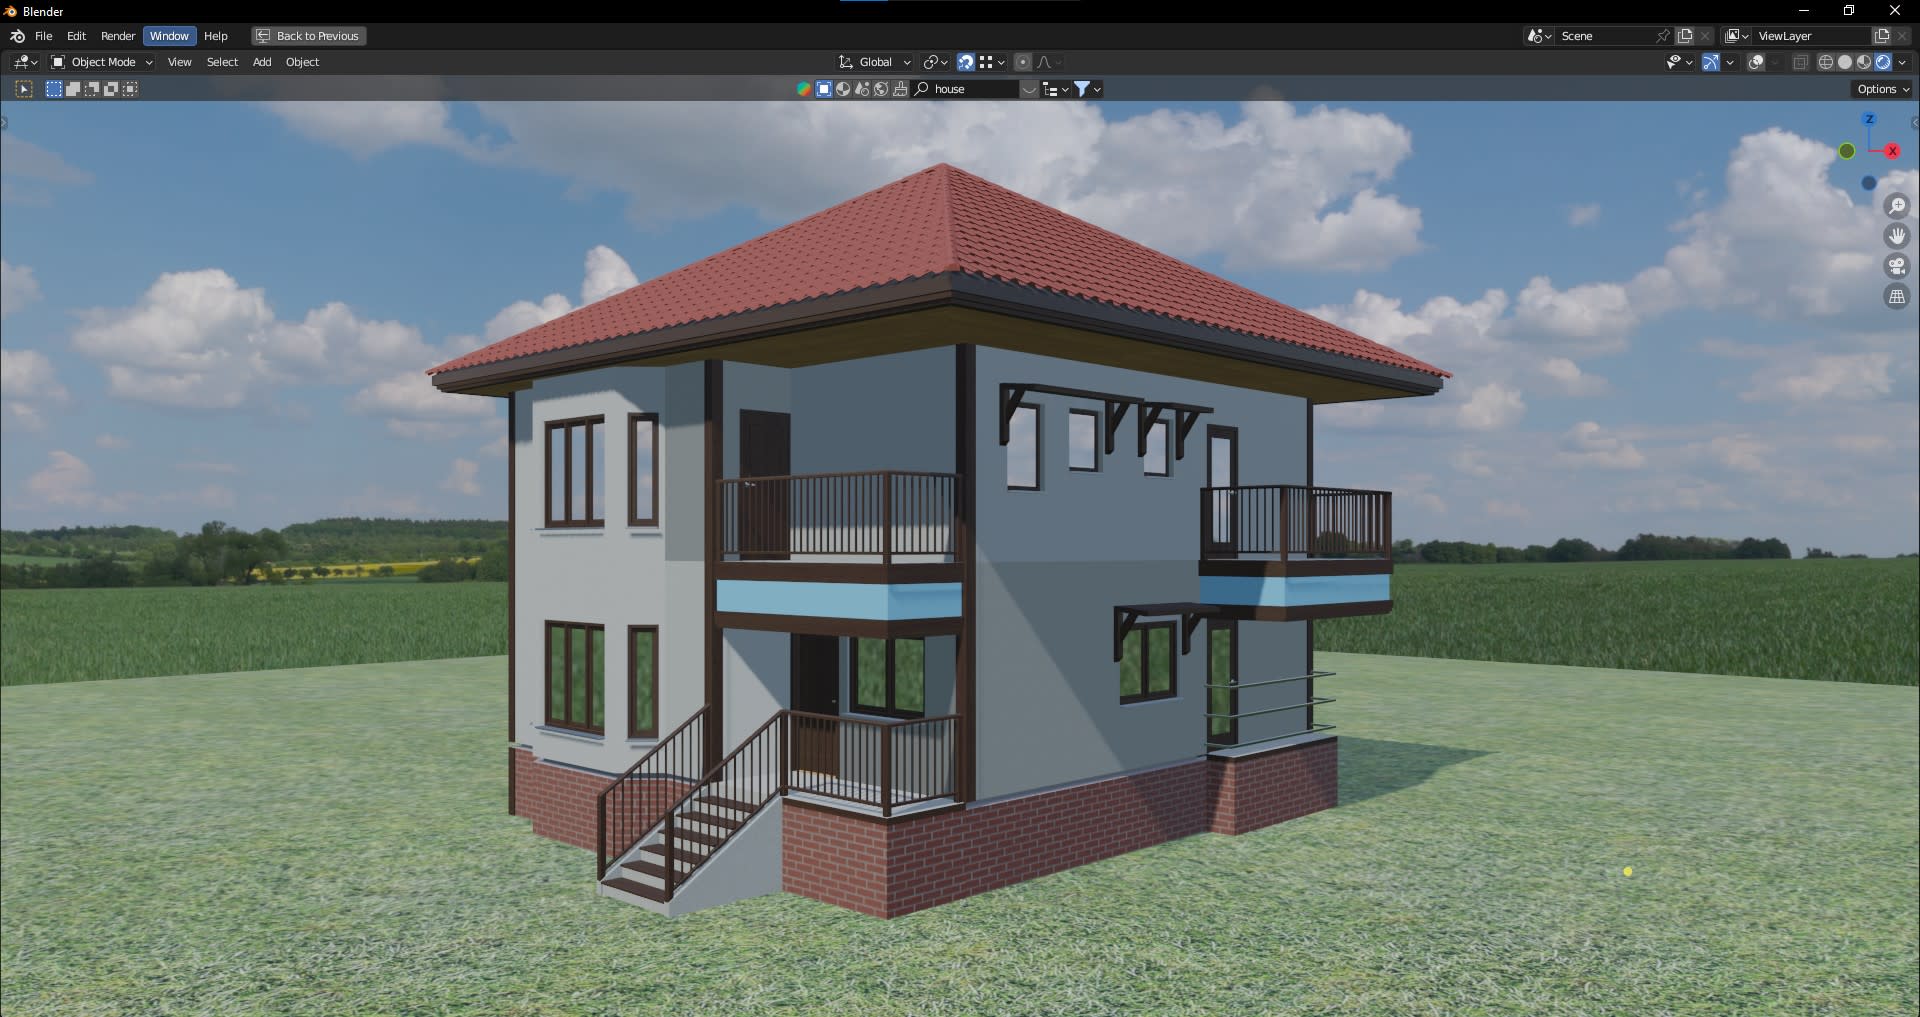 Thiết kế cảnh quan: How To Import Sketchup Model Into Blender [Very Easy]